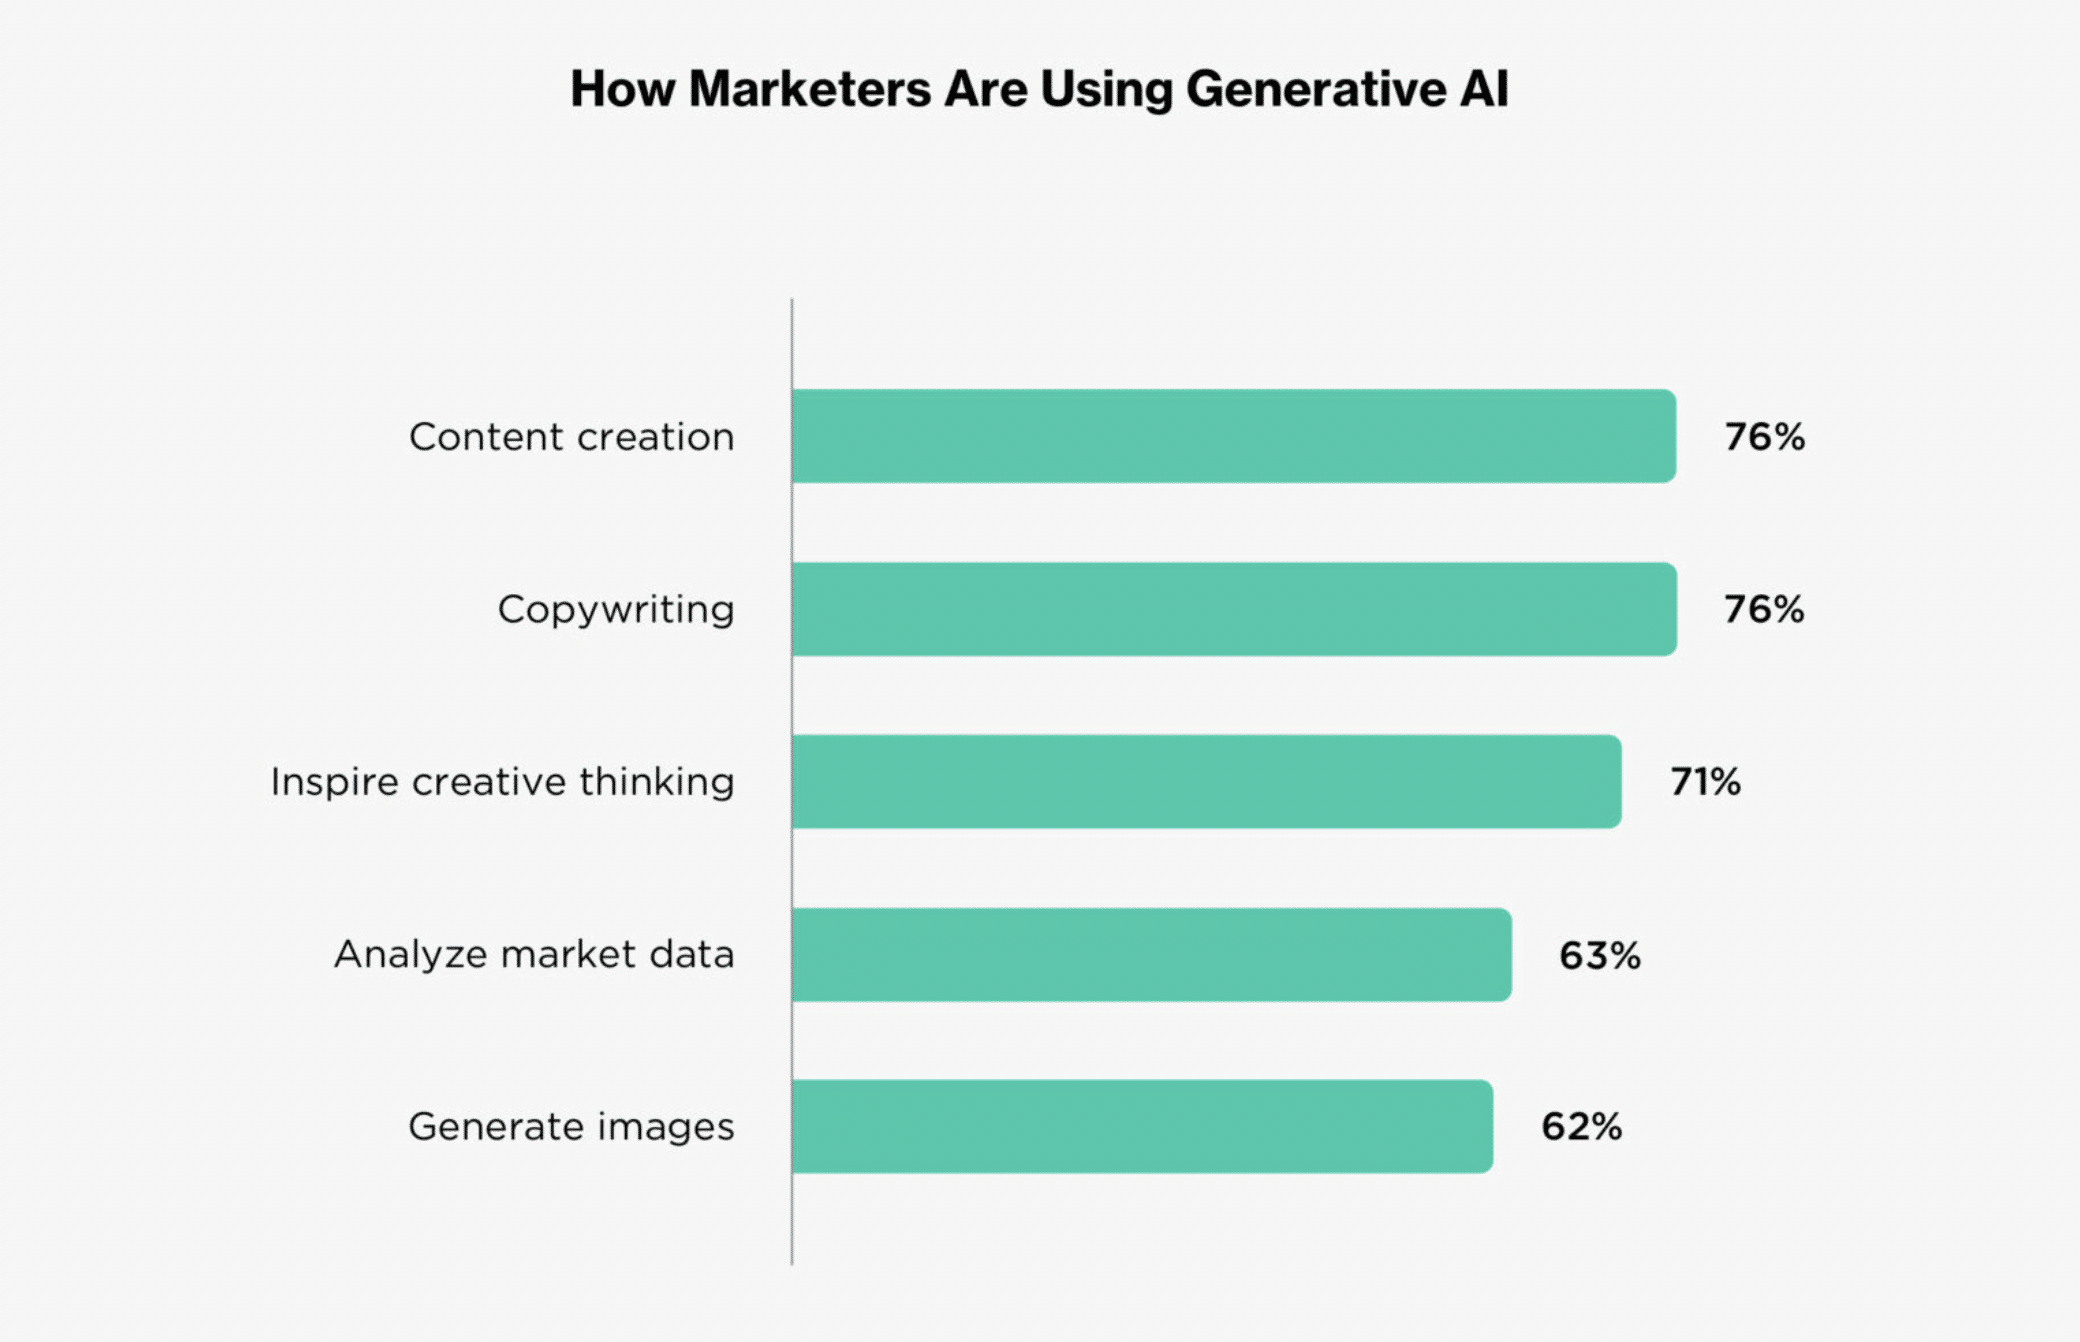 bar graph shows that 63% of marketers are already using generative AI to analyze market data and forecast future outcomes